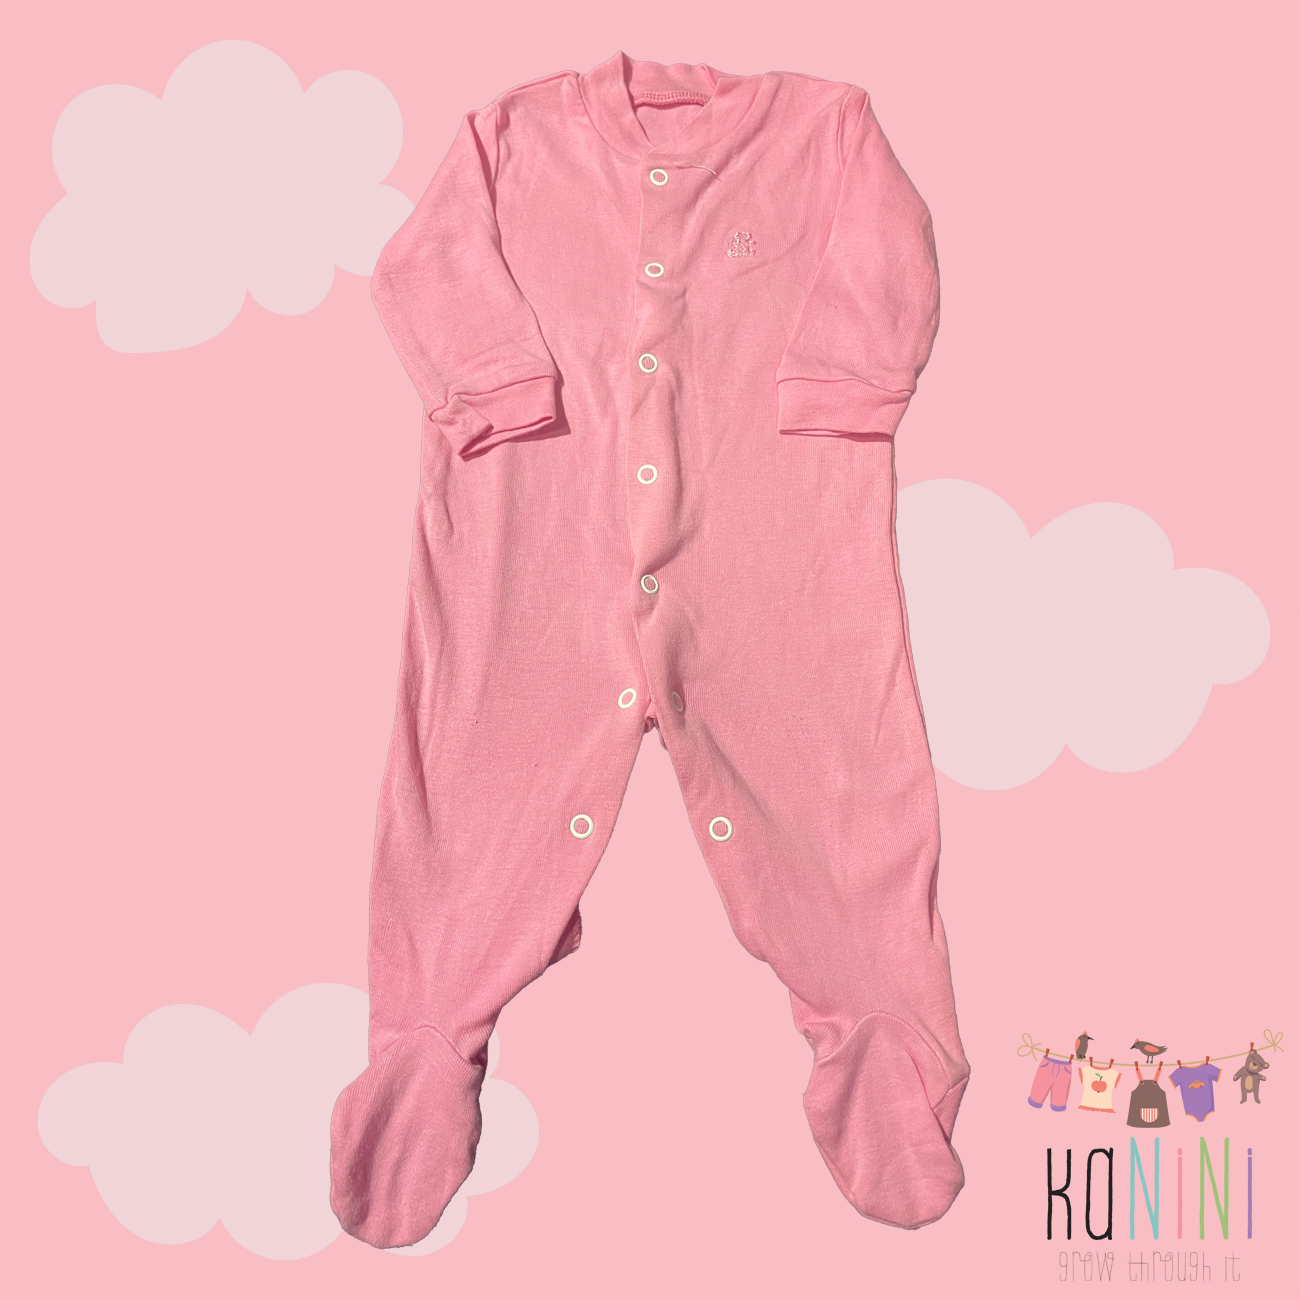 Featured image for “Woolworths 0 - 3 Months Girls Pink Babygrow”